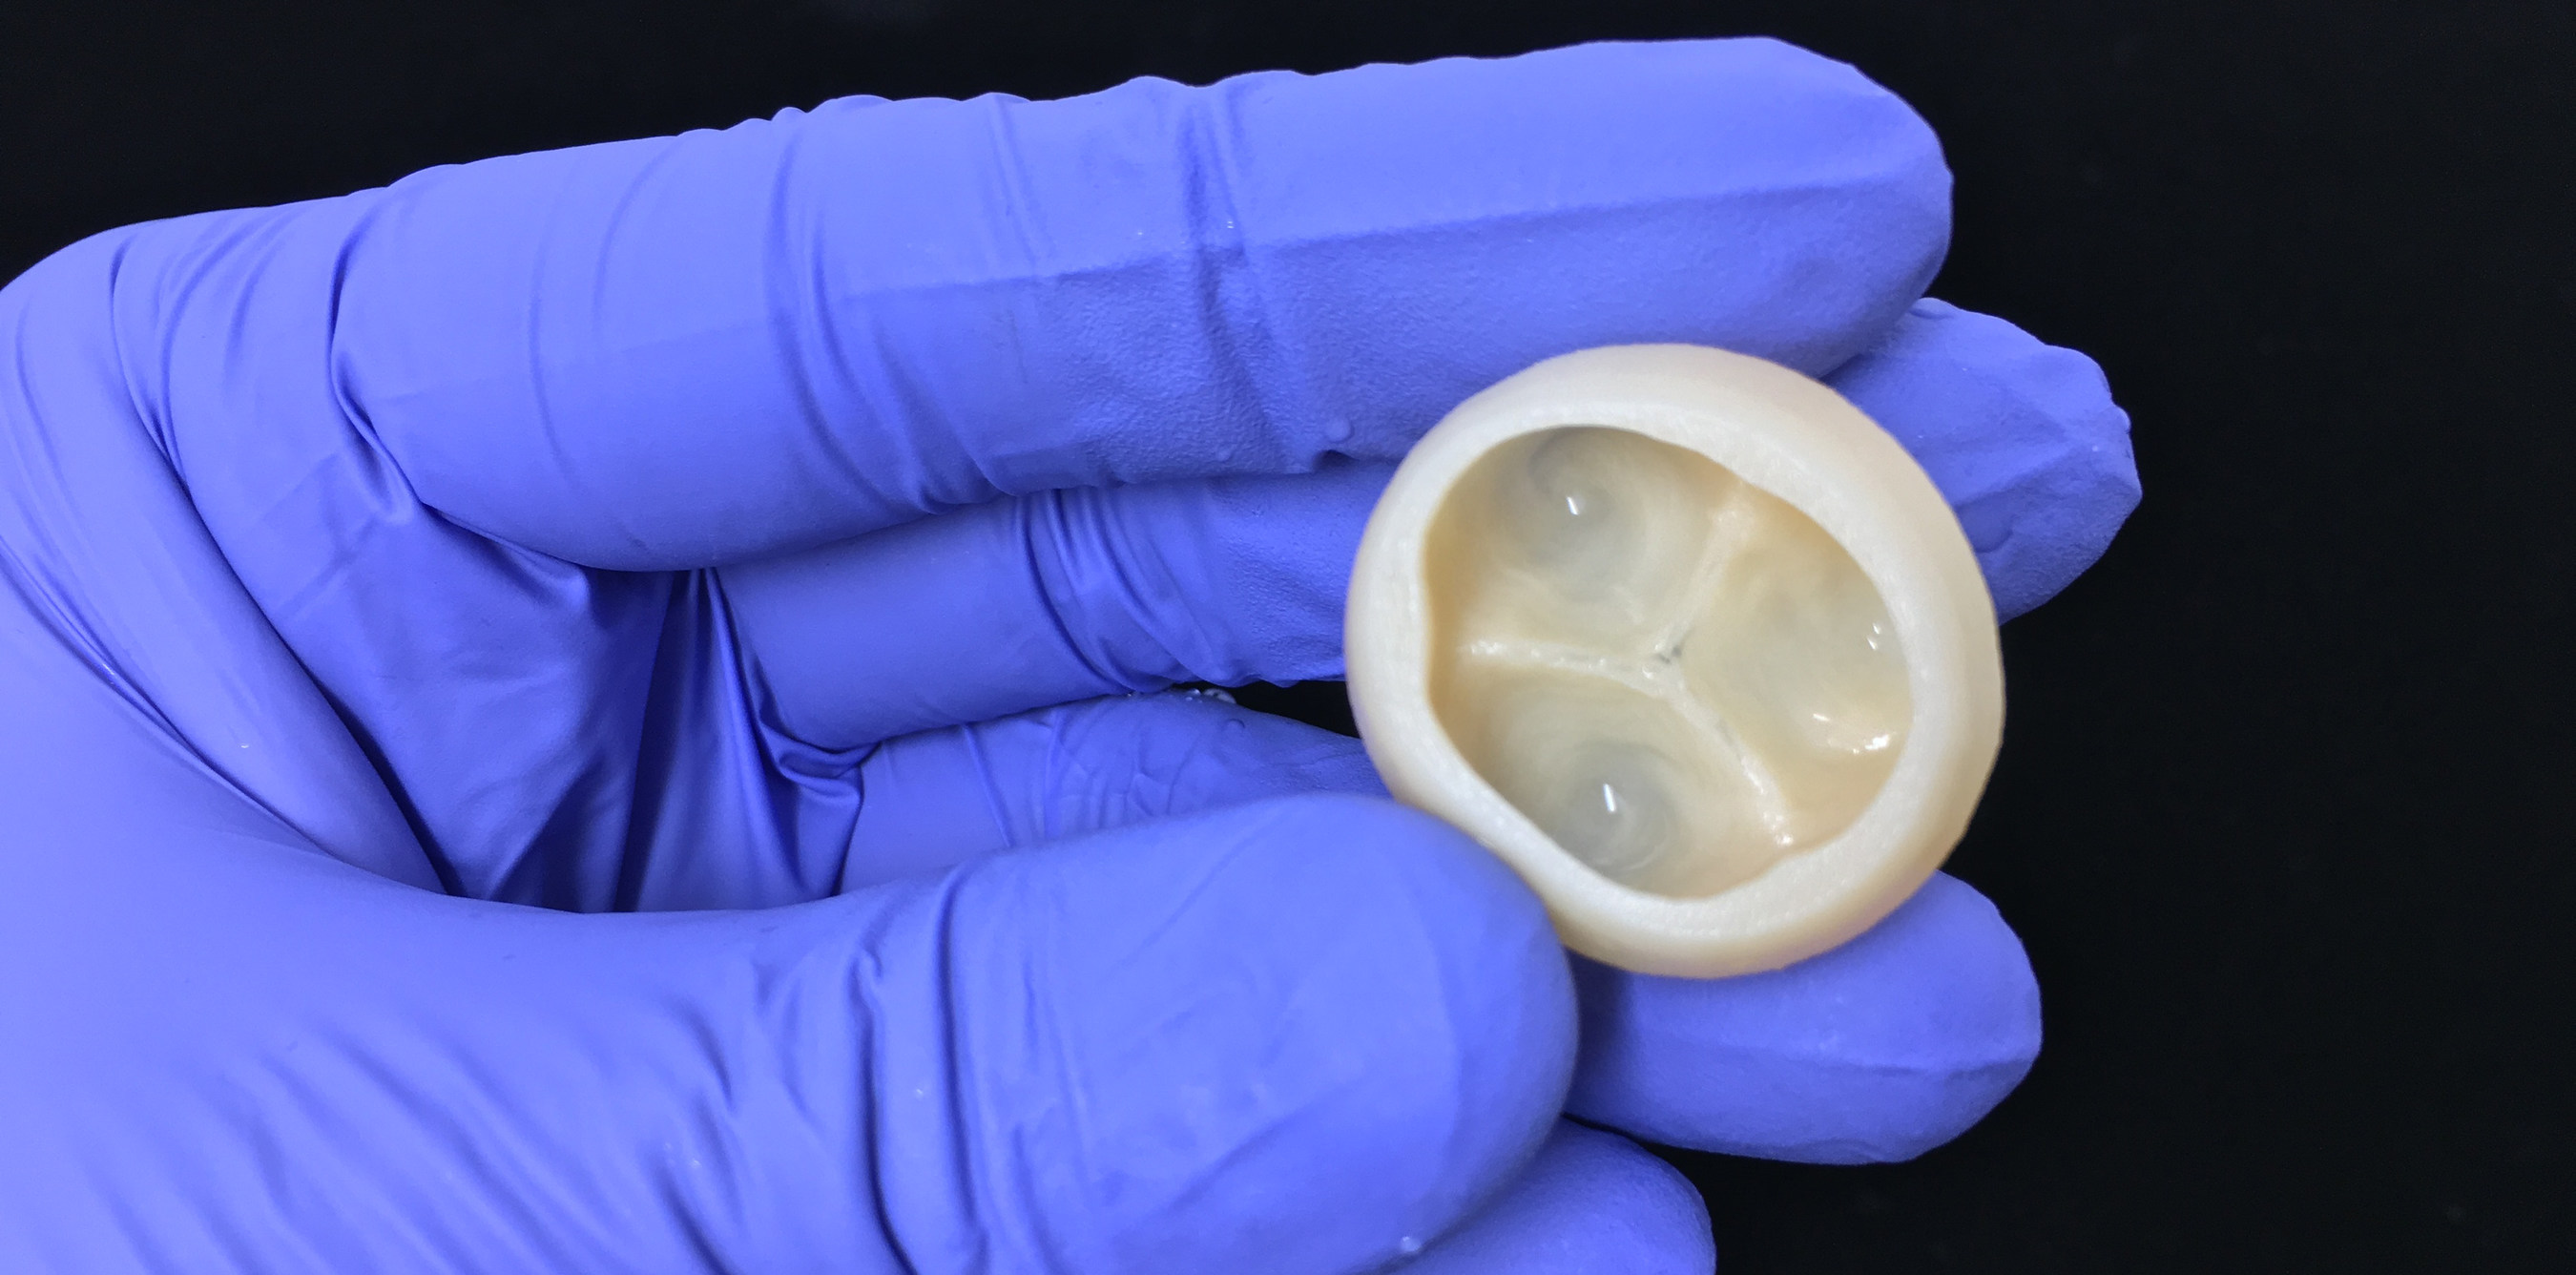 Trileaflet heart valve printed using collagen and Freeform Reversible Embedding of Suspended Hydrogels (FRESH) technology. Photo via CMU.